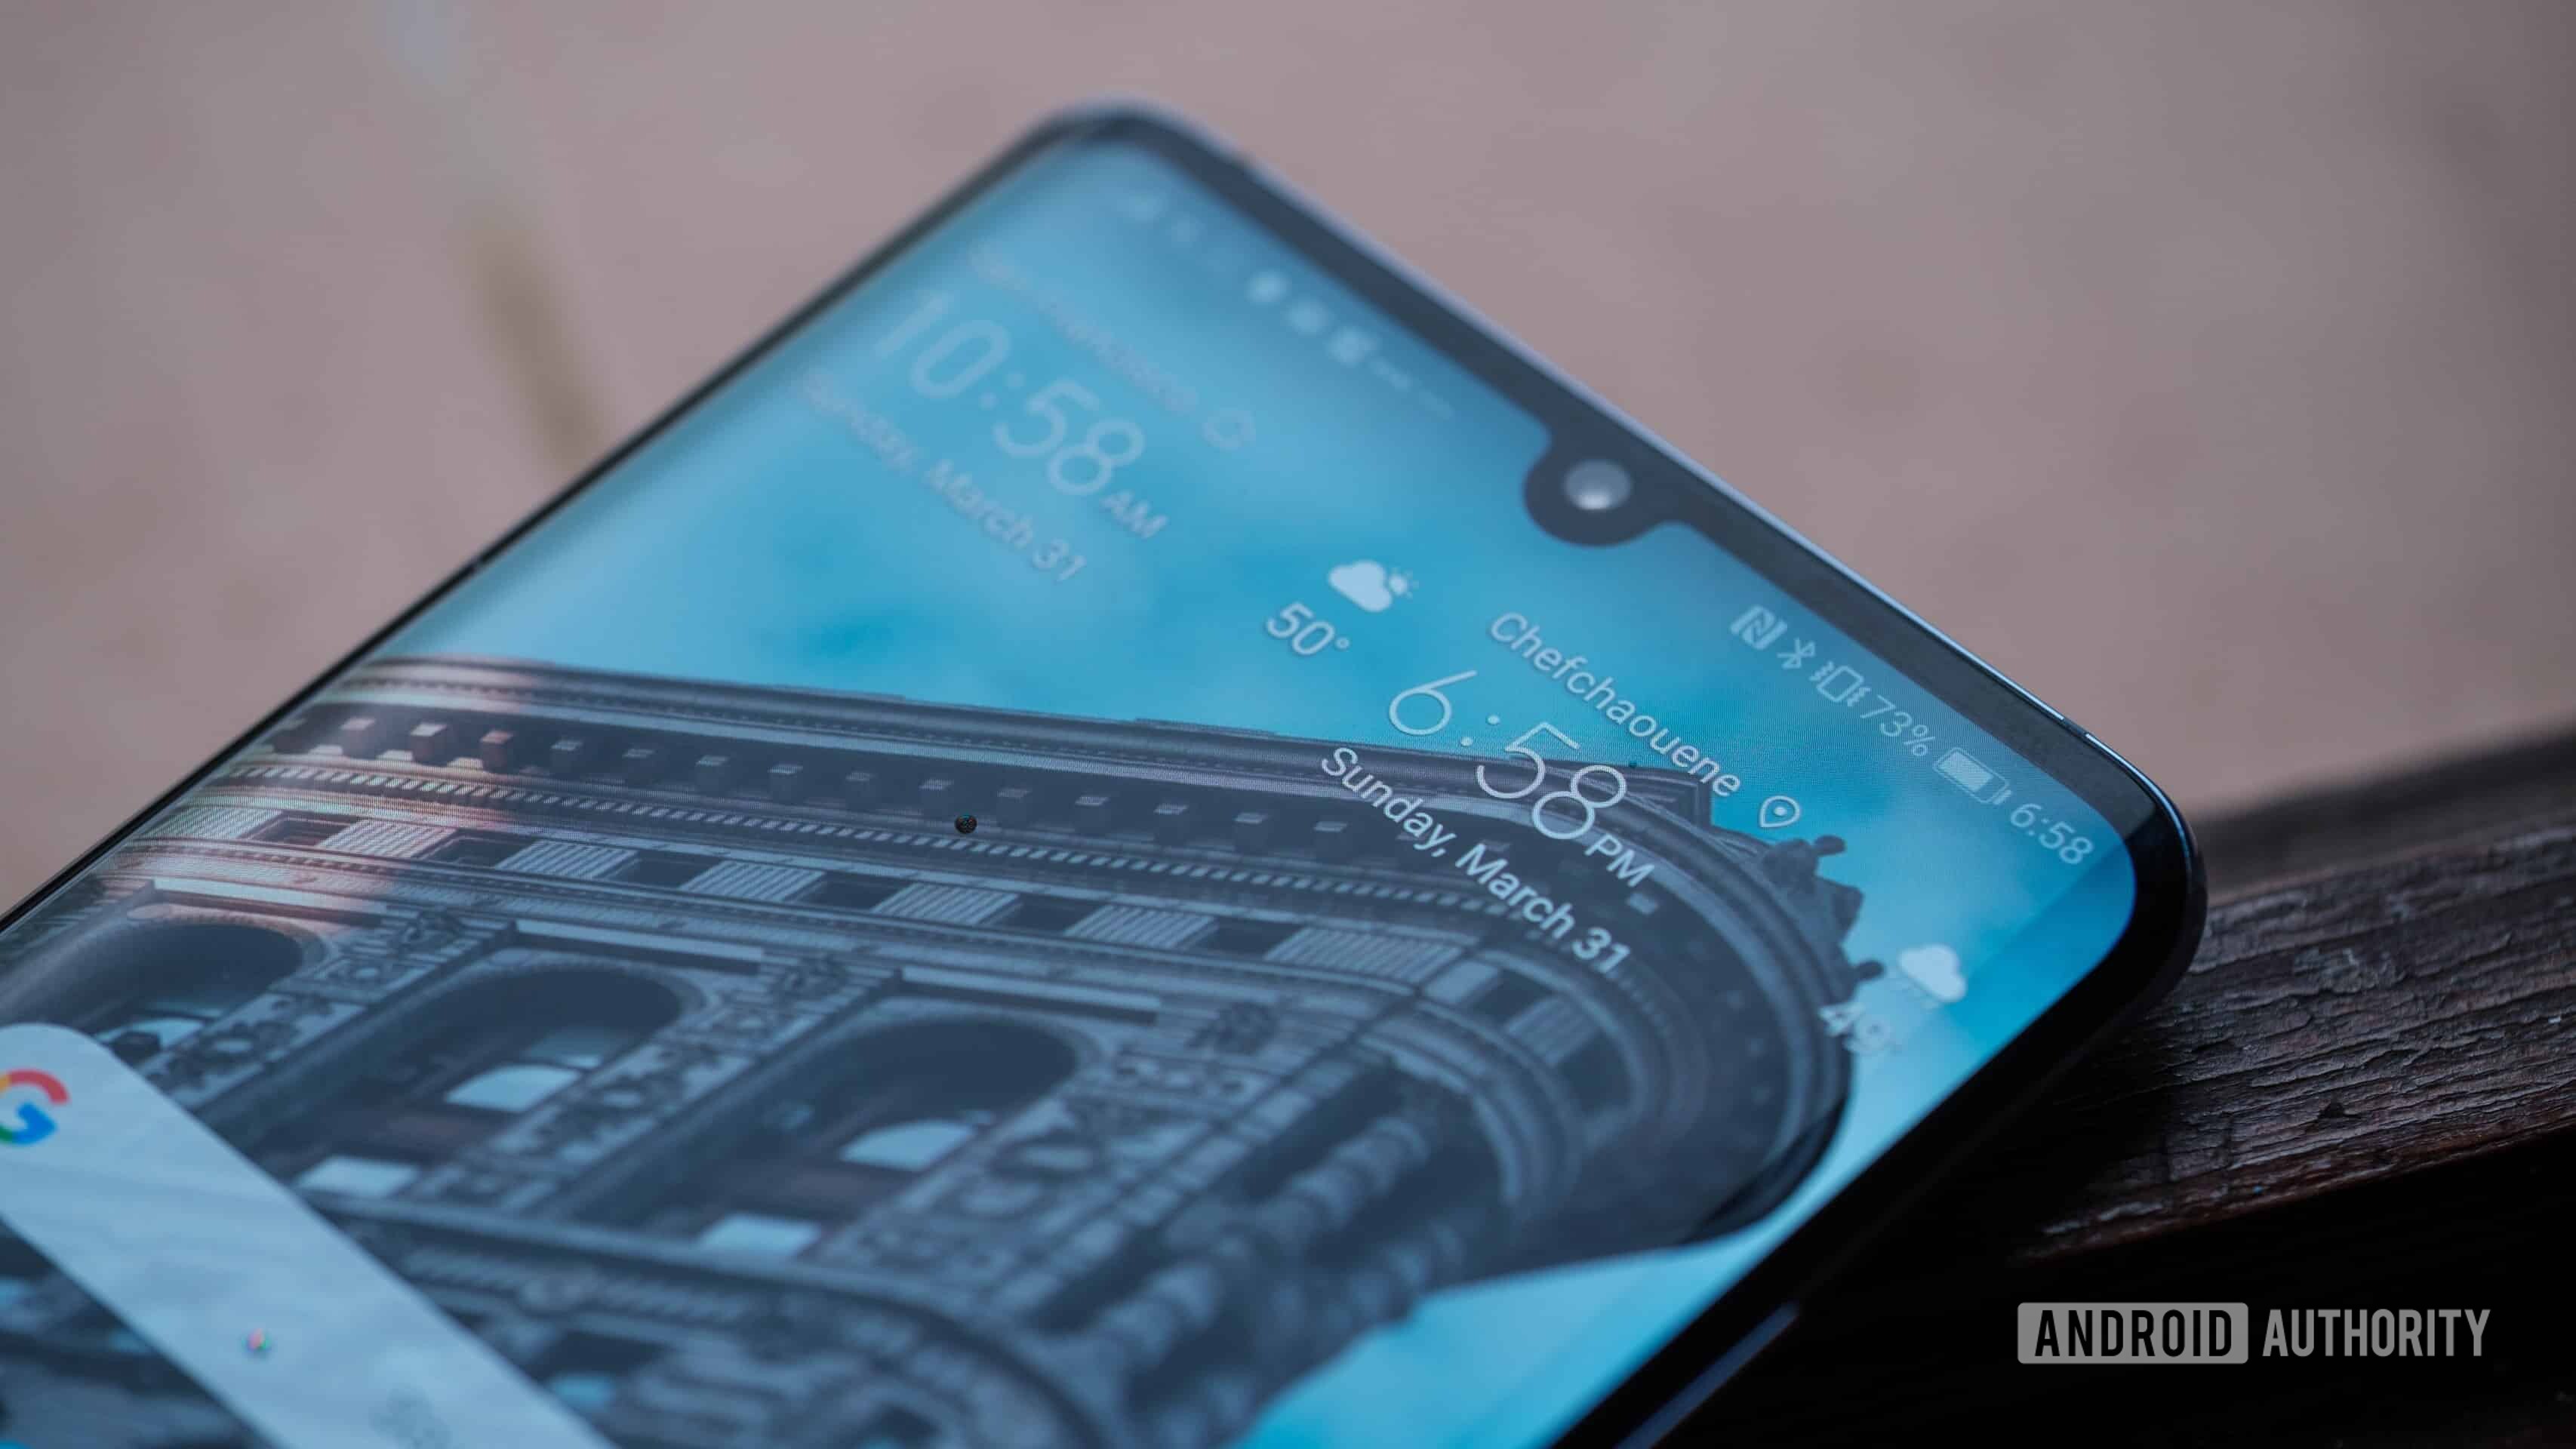 Huawei P30 Pro review: much more than just the best camera